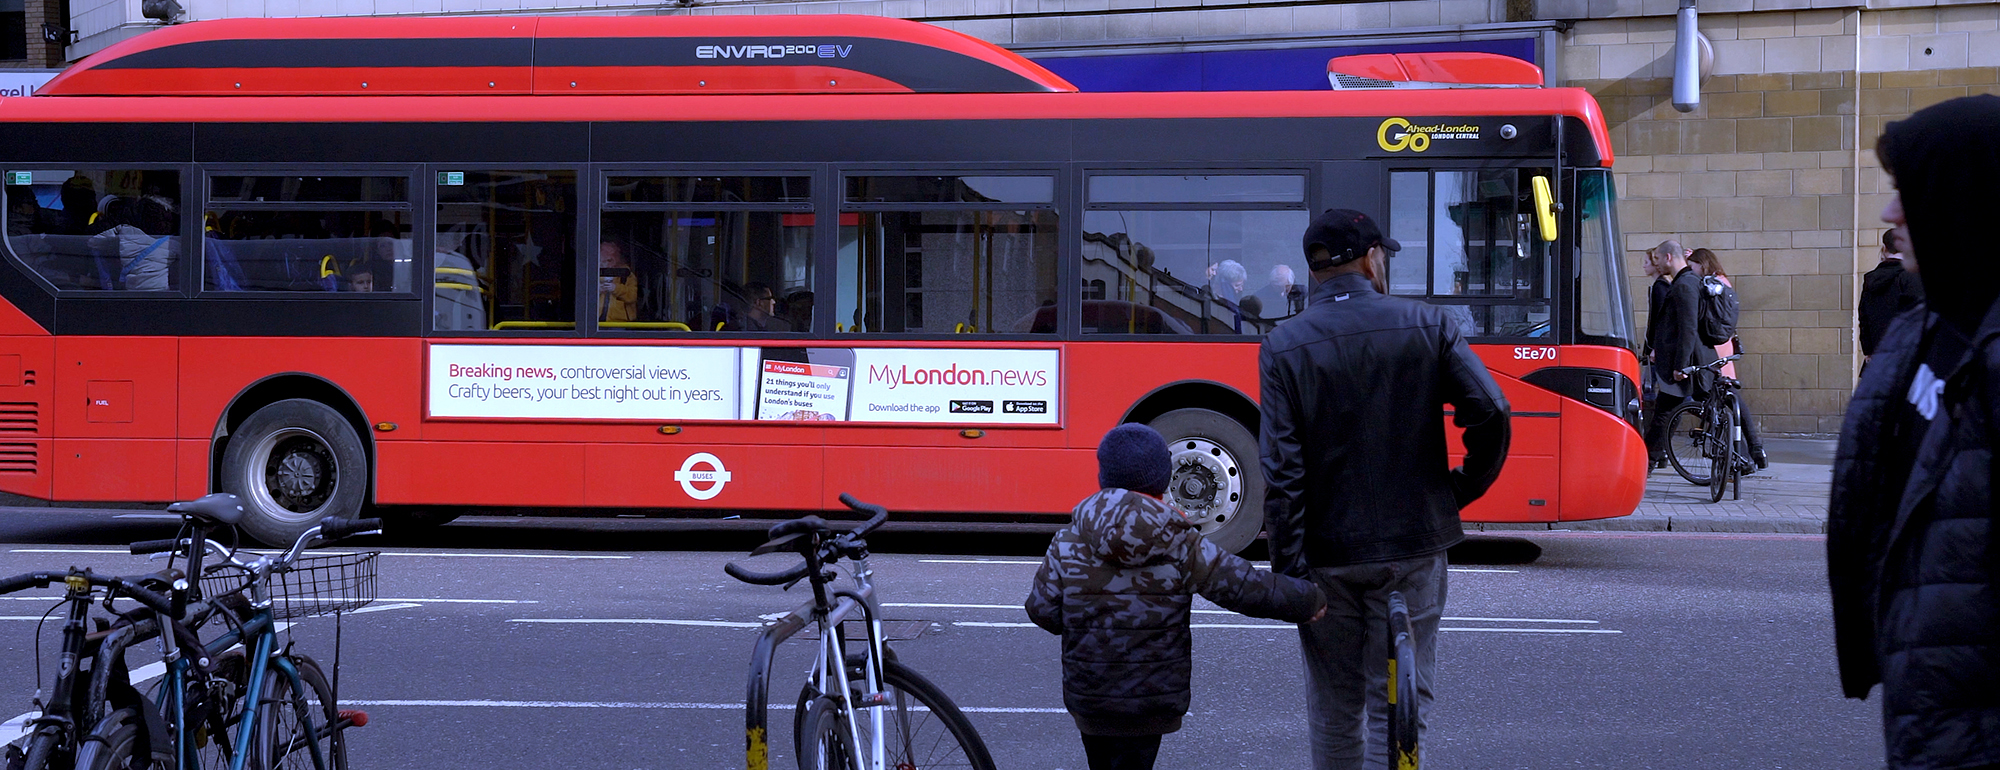 My London: Boosting App Awareness with Mixed Media Campaign